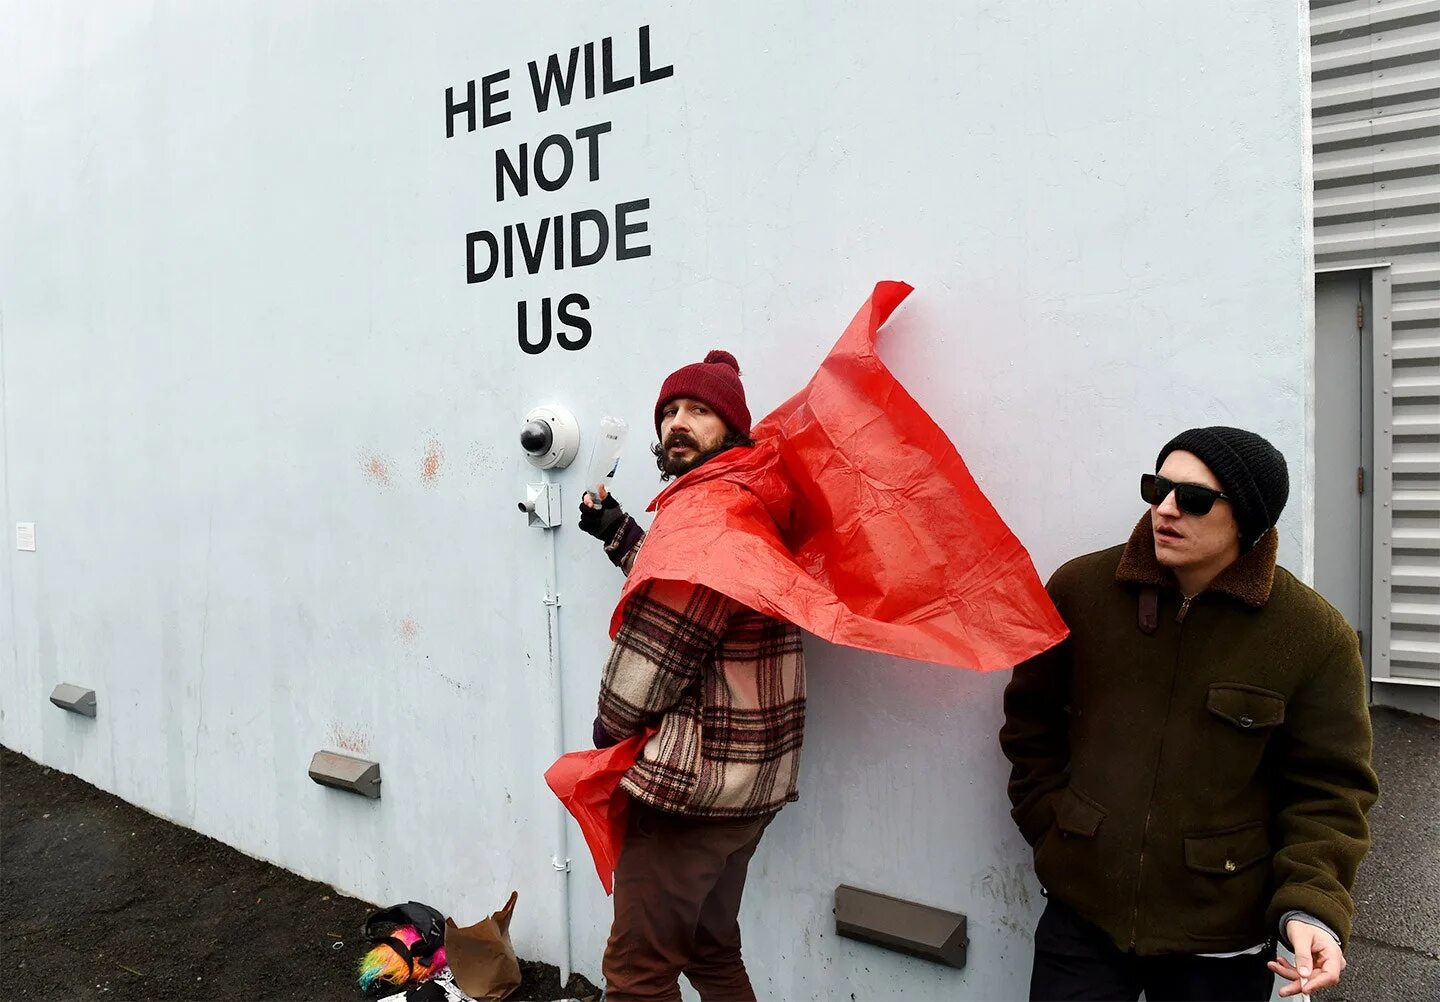 He will not give. Шайа ЛАБАФ против Трампа. Шайа ЛАБАФ трансформеры he will not Divide us. Шайя ЛАБАФА В инсталляции. Hy will not Divide us meme.